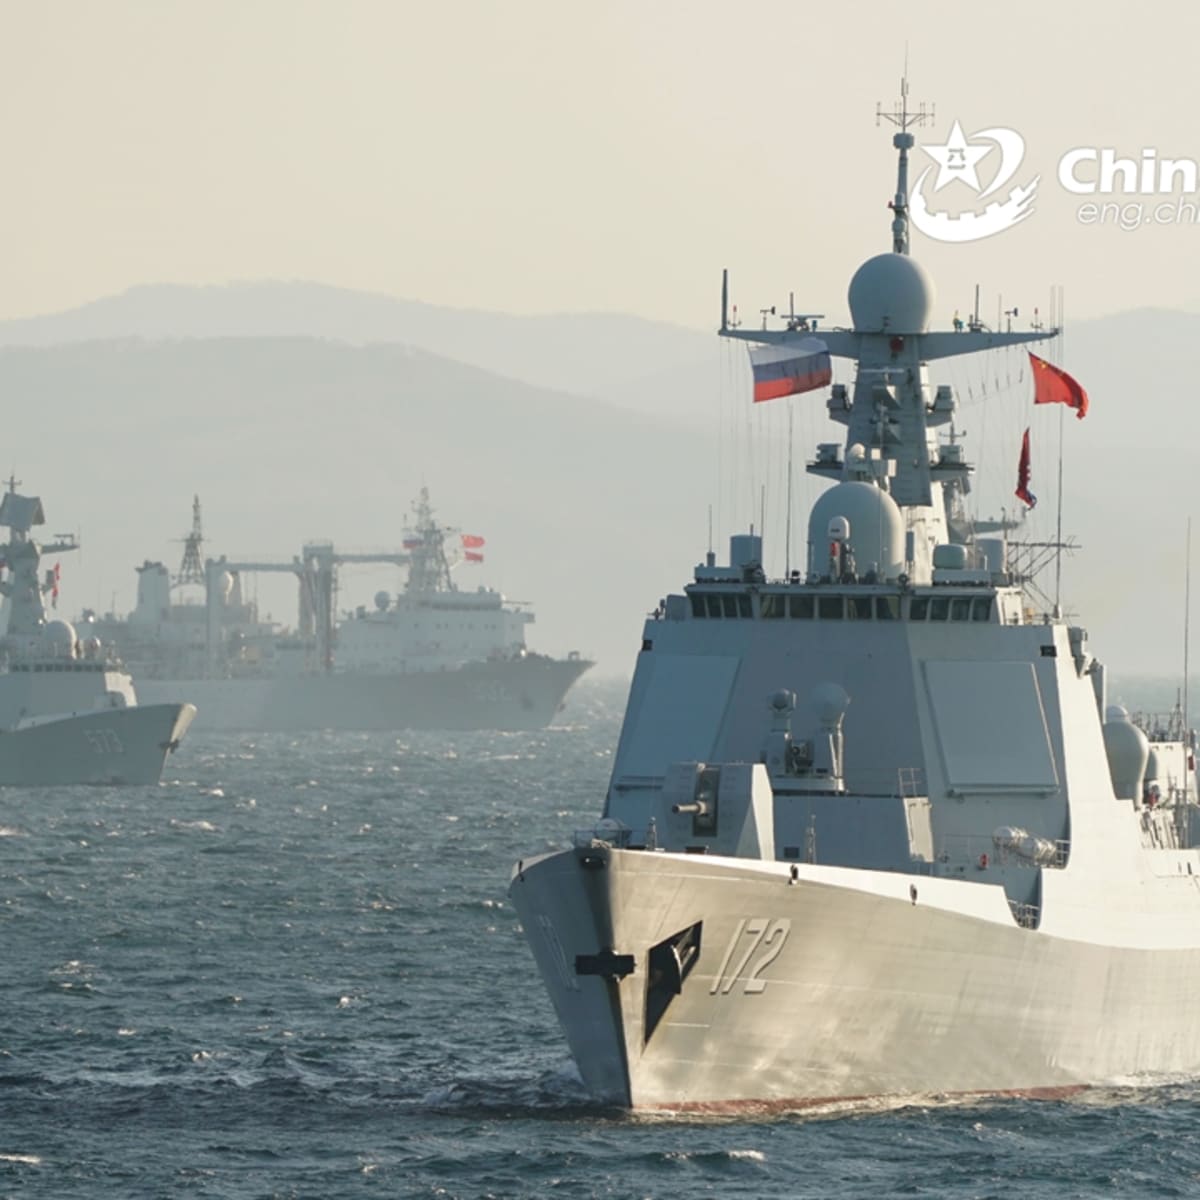 Russian frigates arrive in China in sign of 'close cooperation